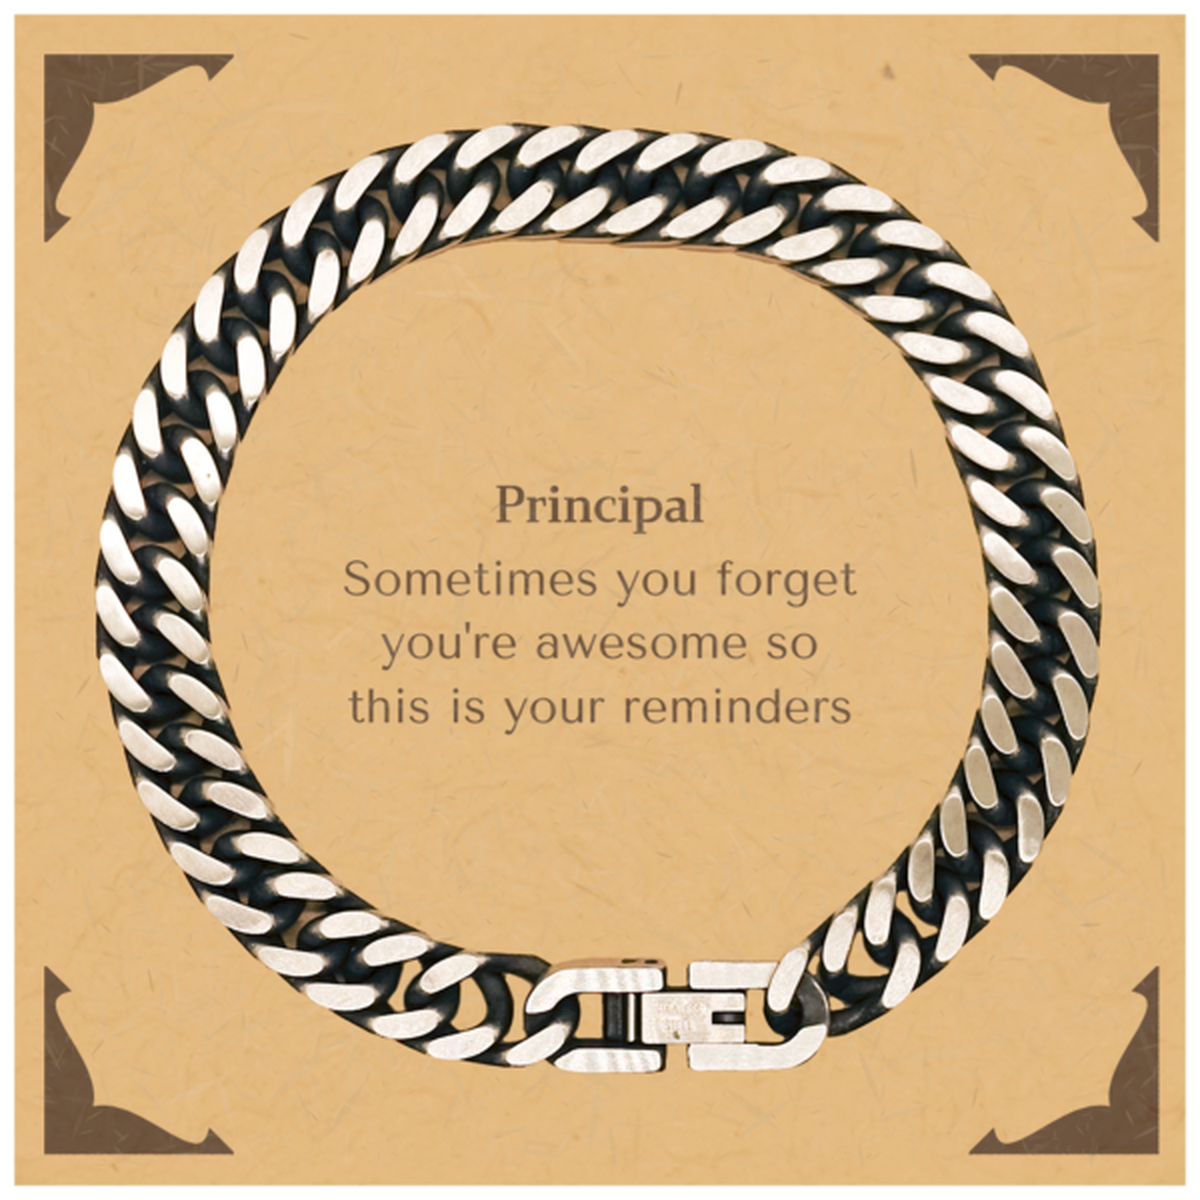 Sentimental Principal Cuban Link Chain Bracelet, Principal Sometimes you forget you're awesome so this is your reminders, Graduation Christmas Birthday Gifts for Principal, Men, Women, Coworkers